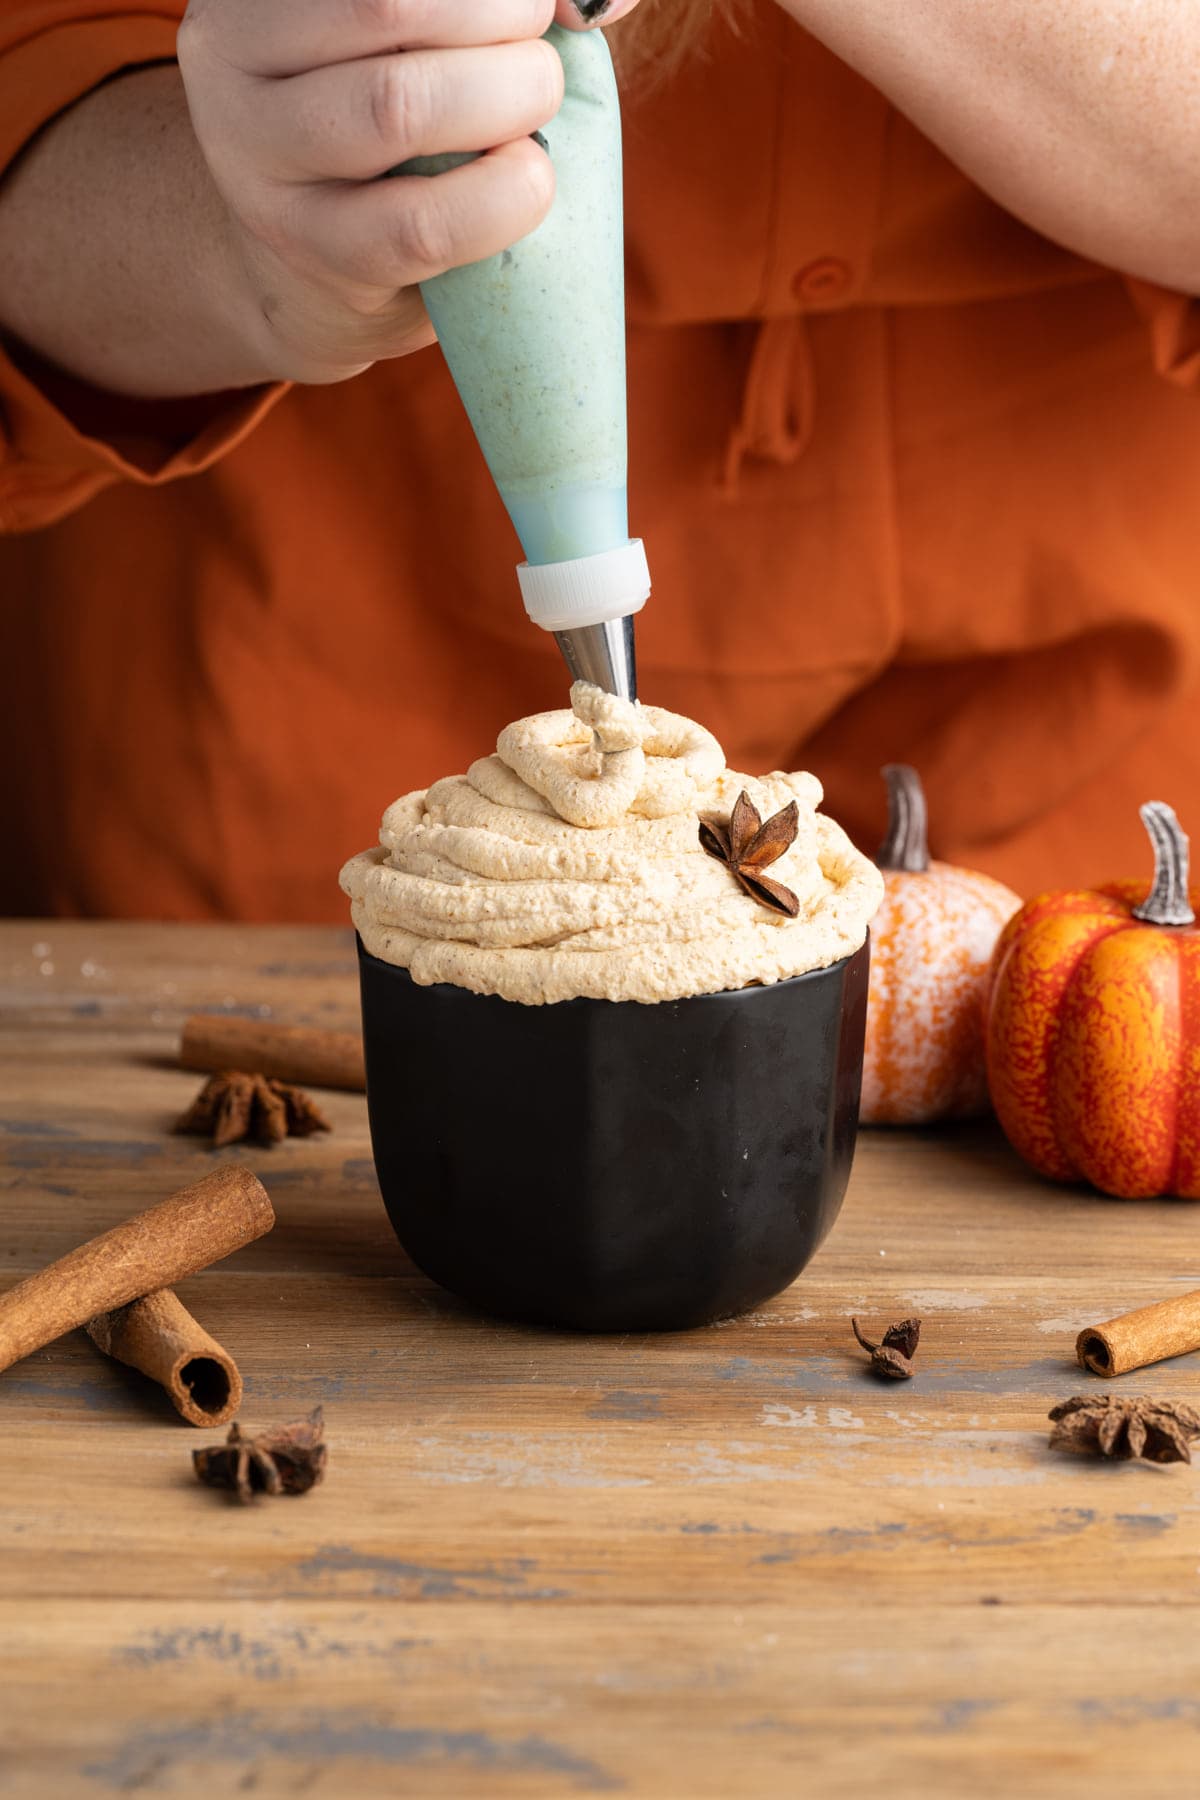 Adding pumpkin whipped cream to a bowl using a piping bag